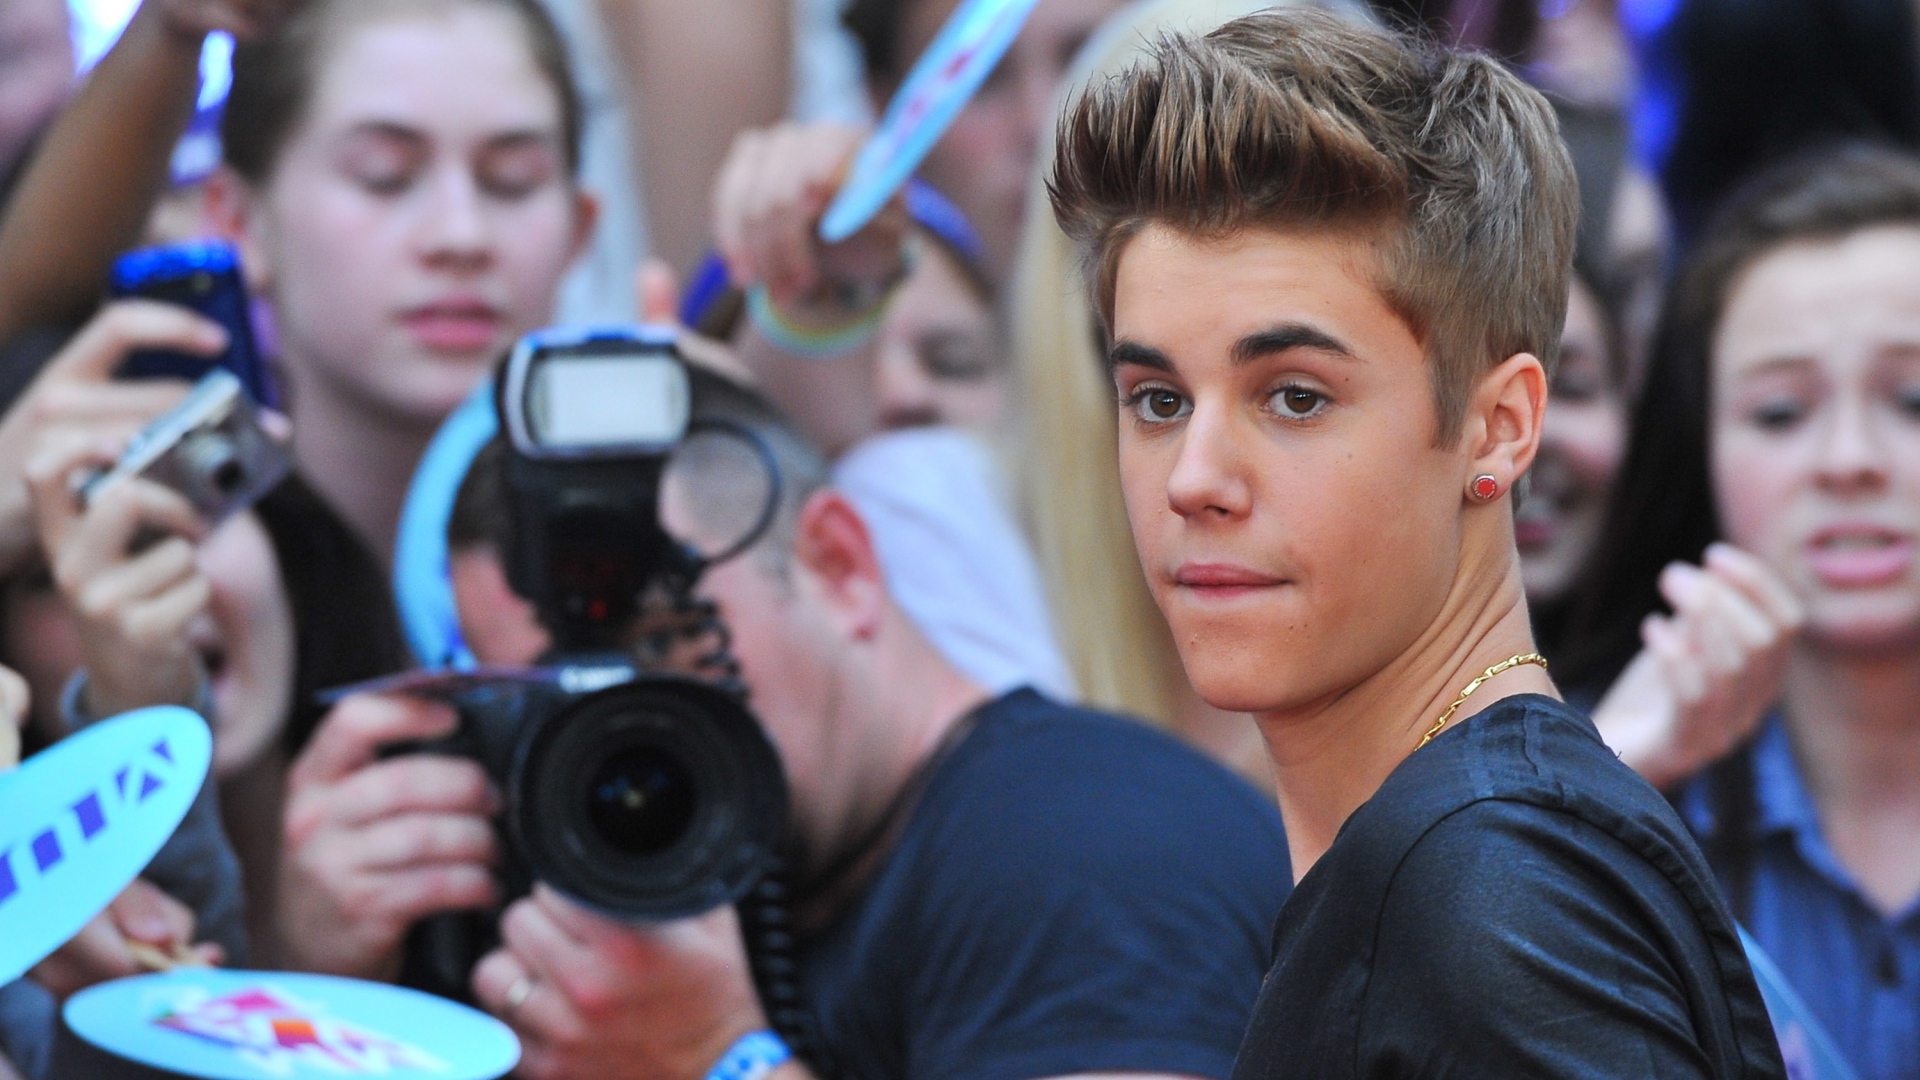 How To Contact With Justin Bieber Fans Club?